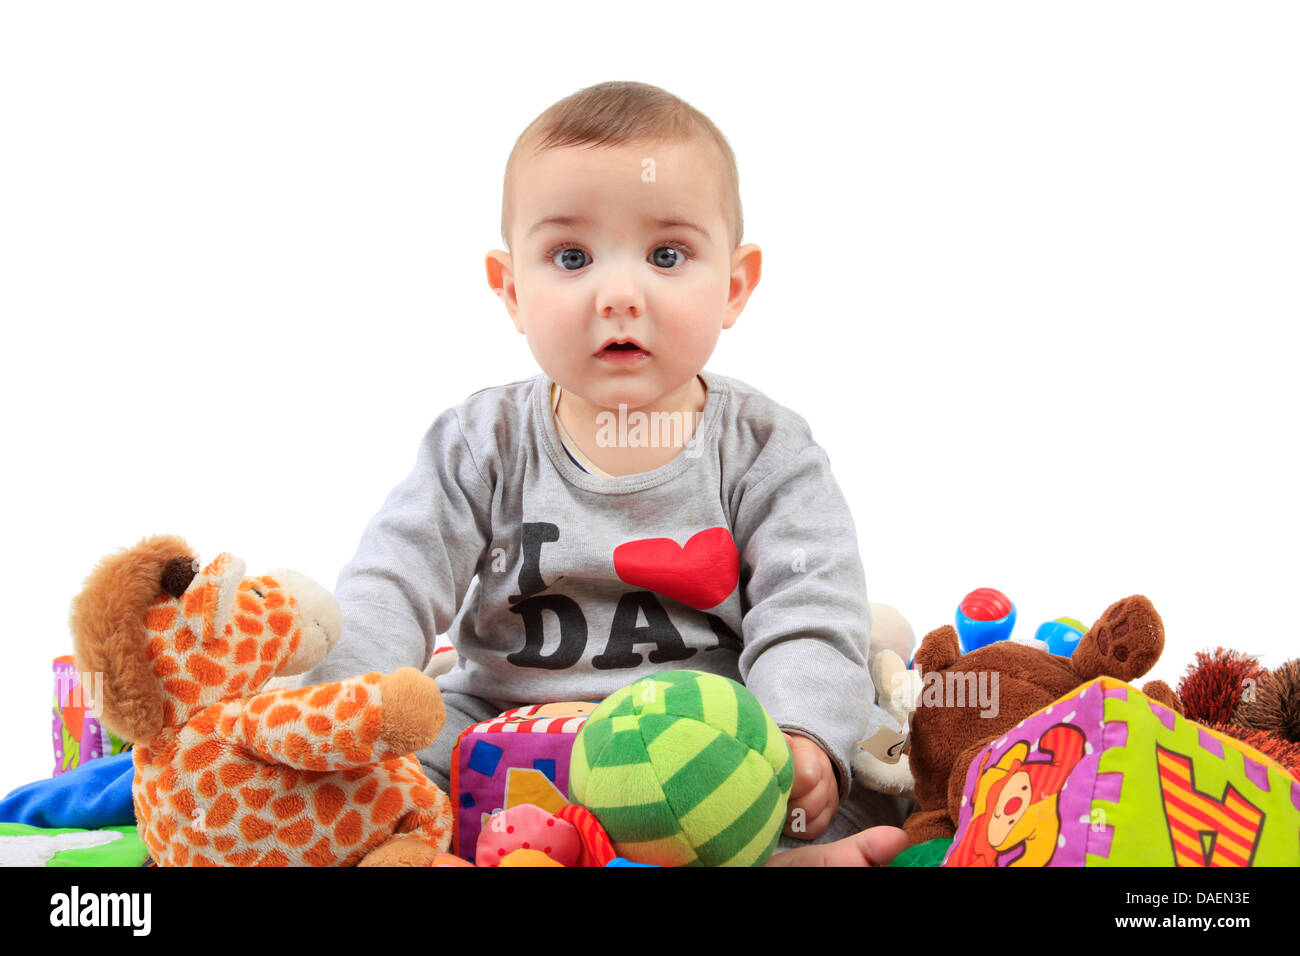 baby sitting in a heap of playthings Stock Photo